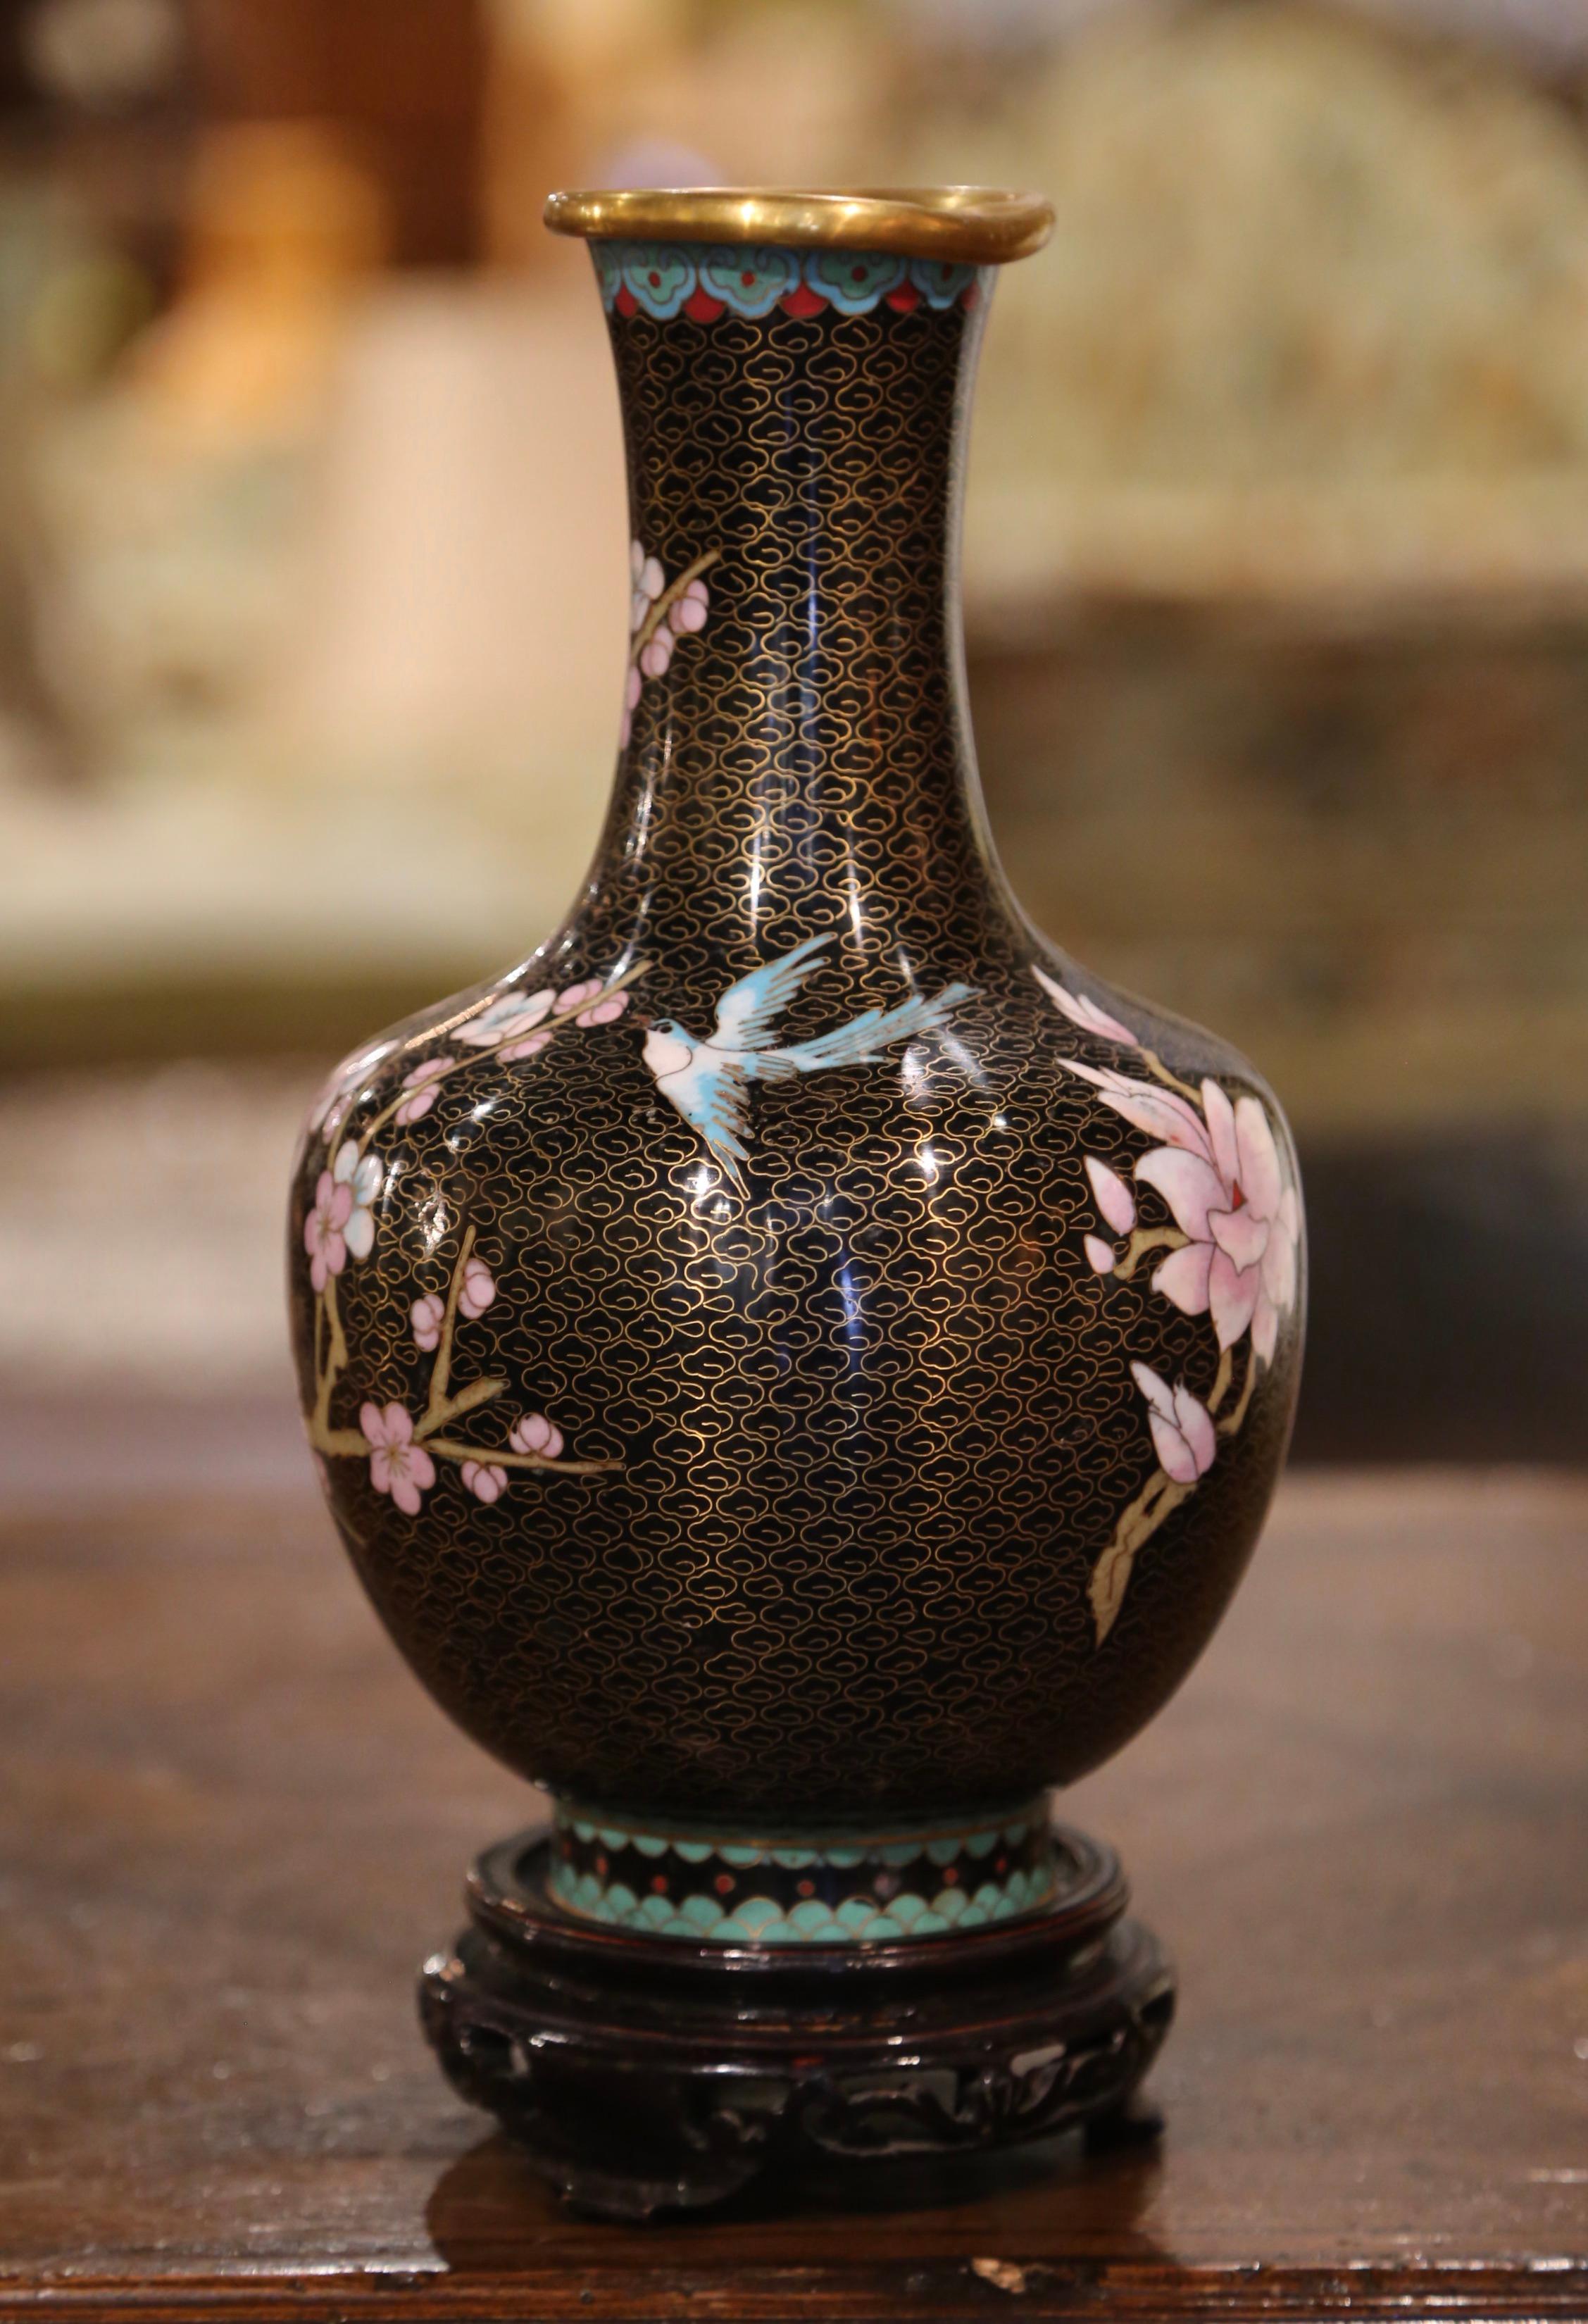  Vintage Chinese Cloisonne Enamel Vase with Floral Motifs on Wooden Stand In Excellent Condition For Sale In Dallas, TX